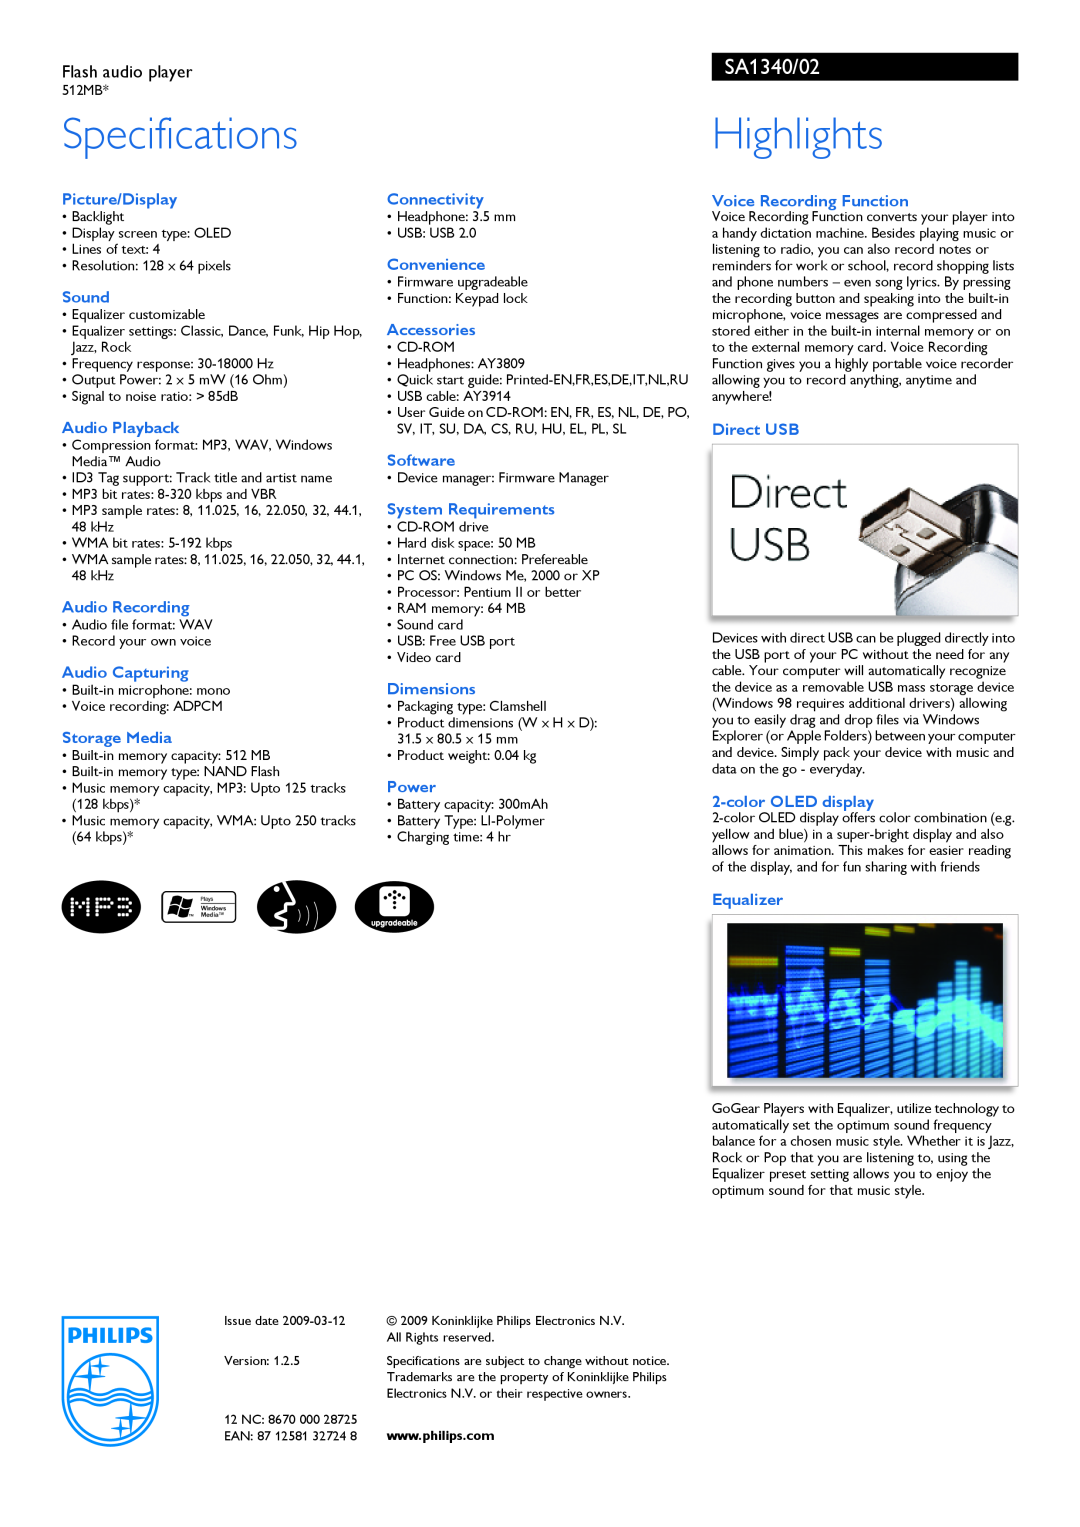 Philips manual SA1340/02, Flash audio player, Specifications, Highlights 